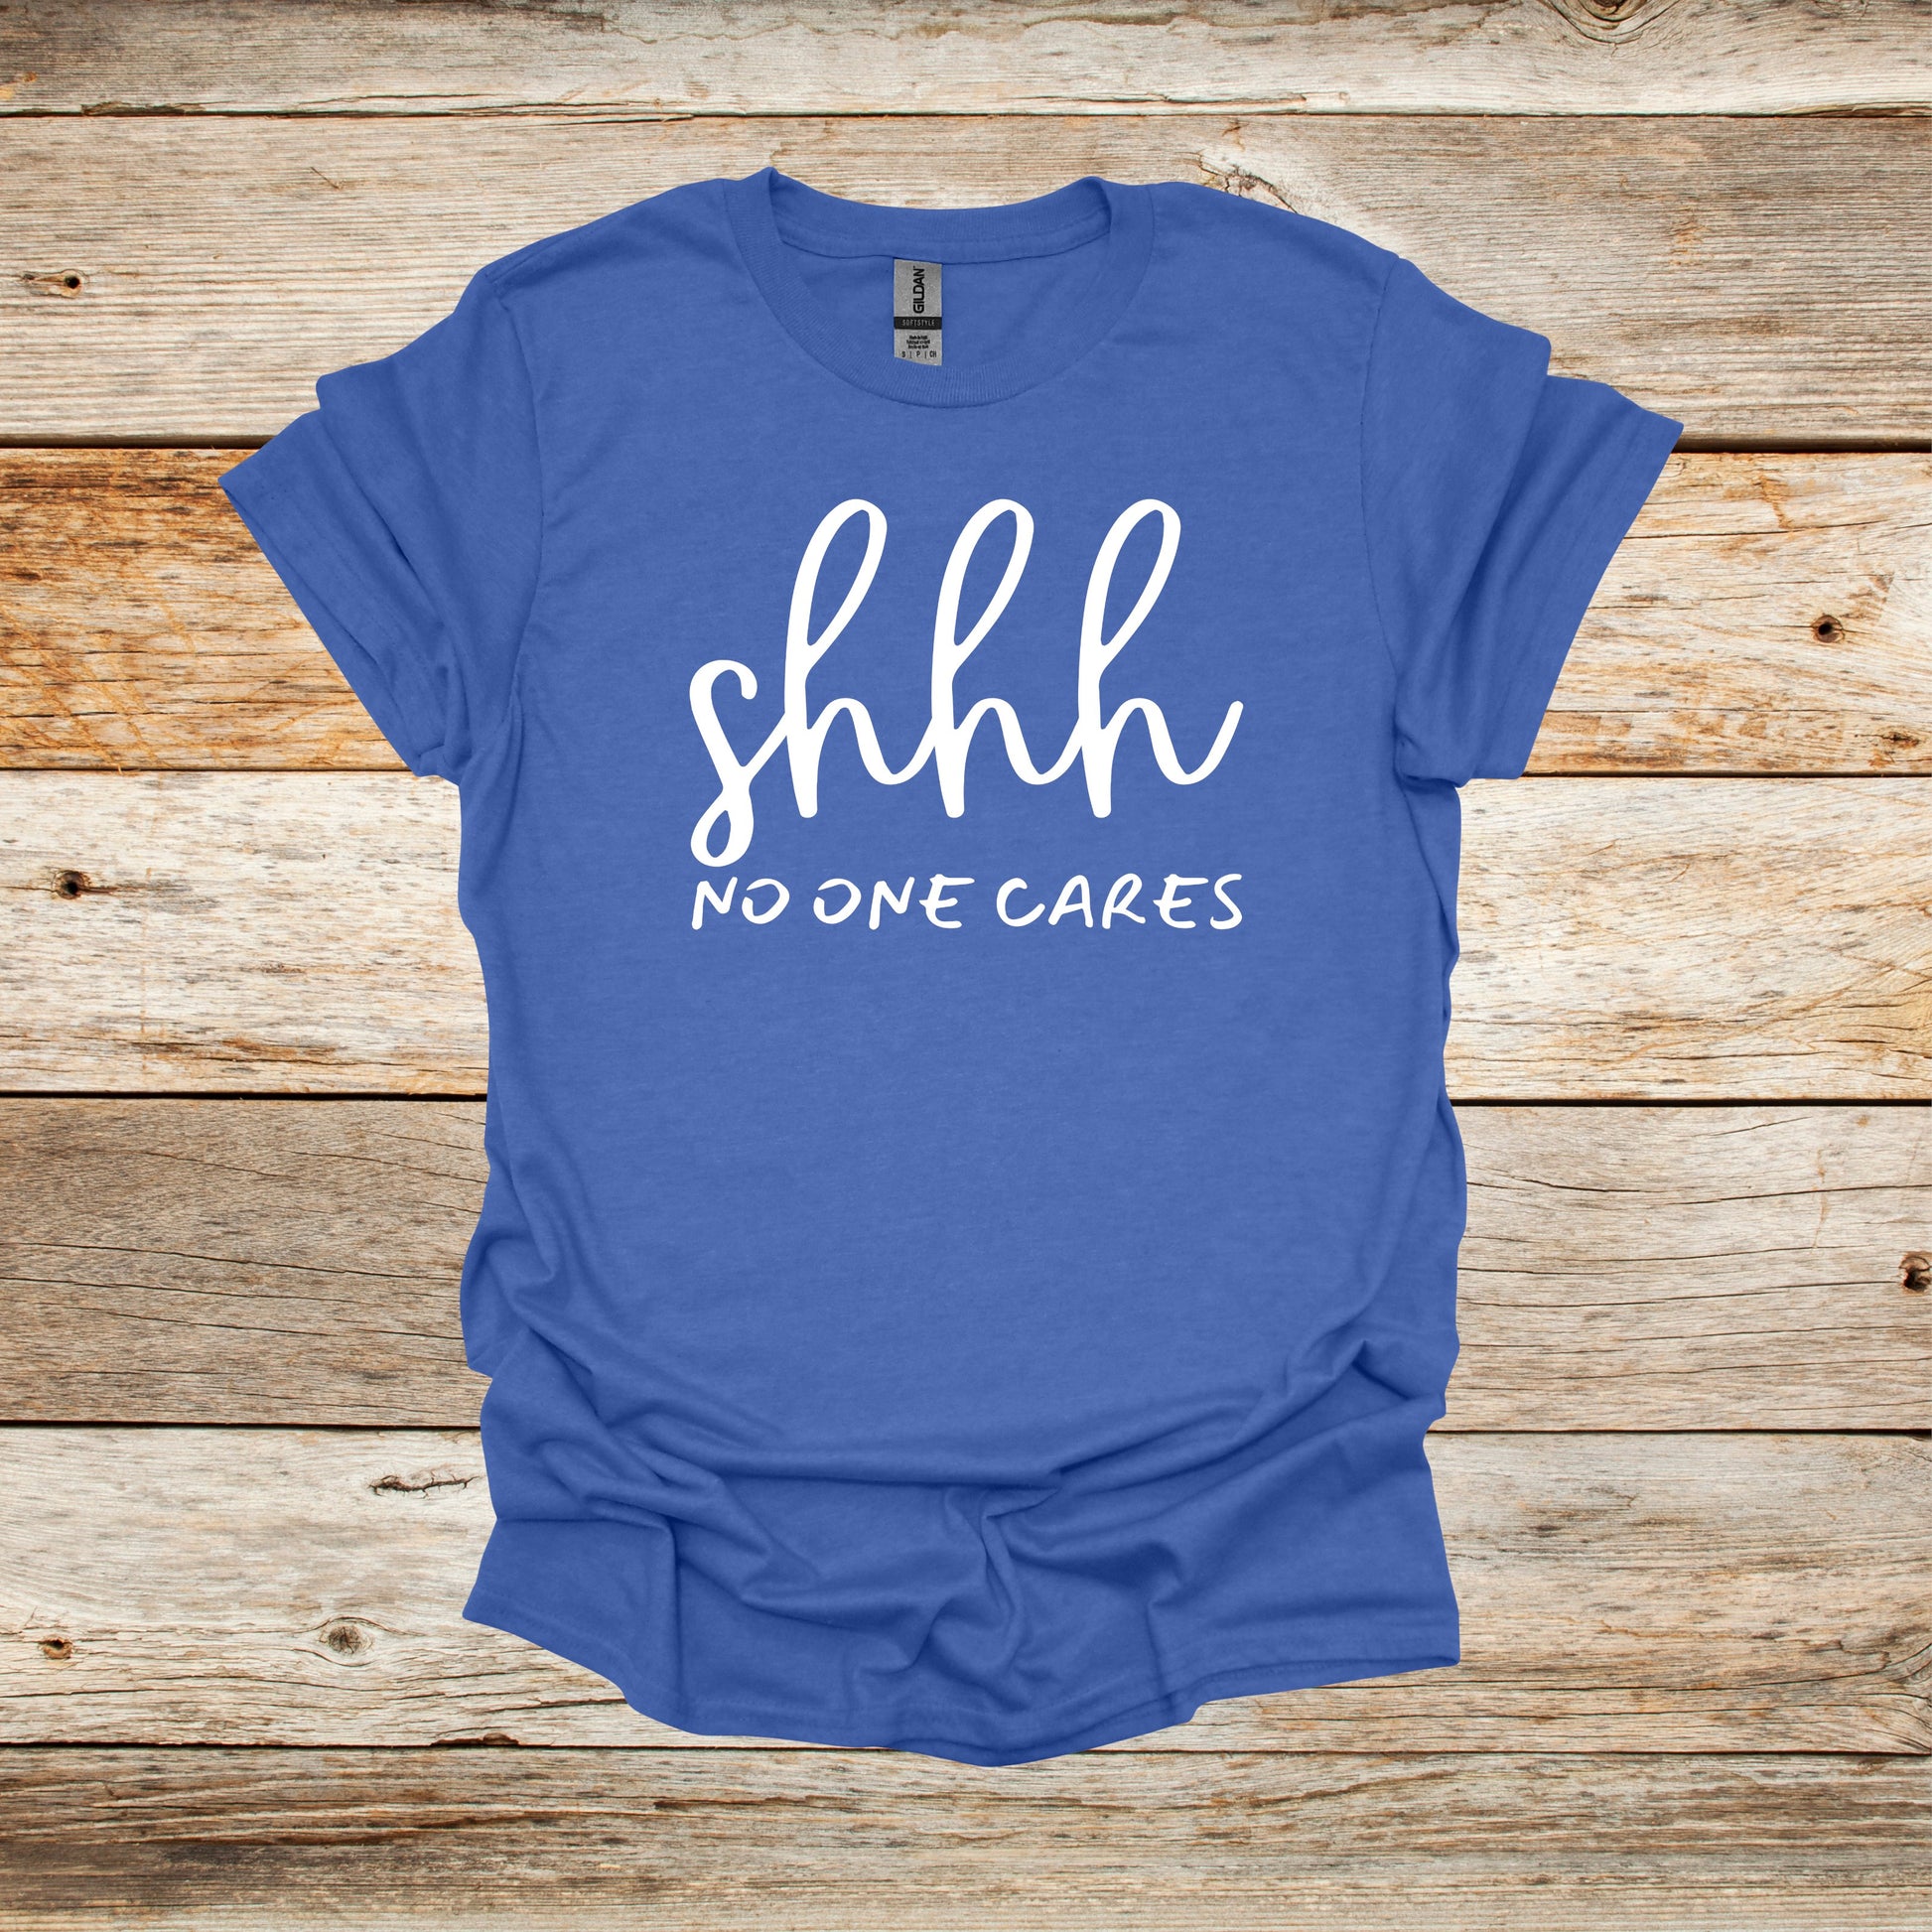 Sayings T-Shirt -Shhh No One Cares - Men's and Women's Tee Shirts - Sayings T-Shirts Graphic Avenue Heather Royal Adult Small 